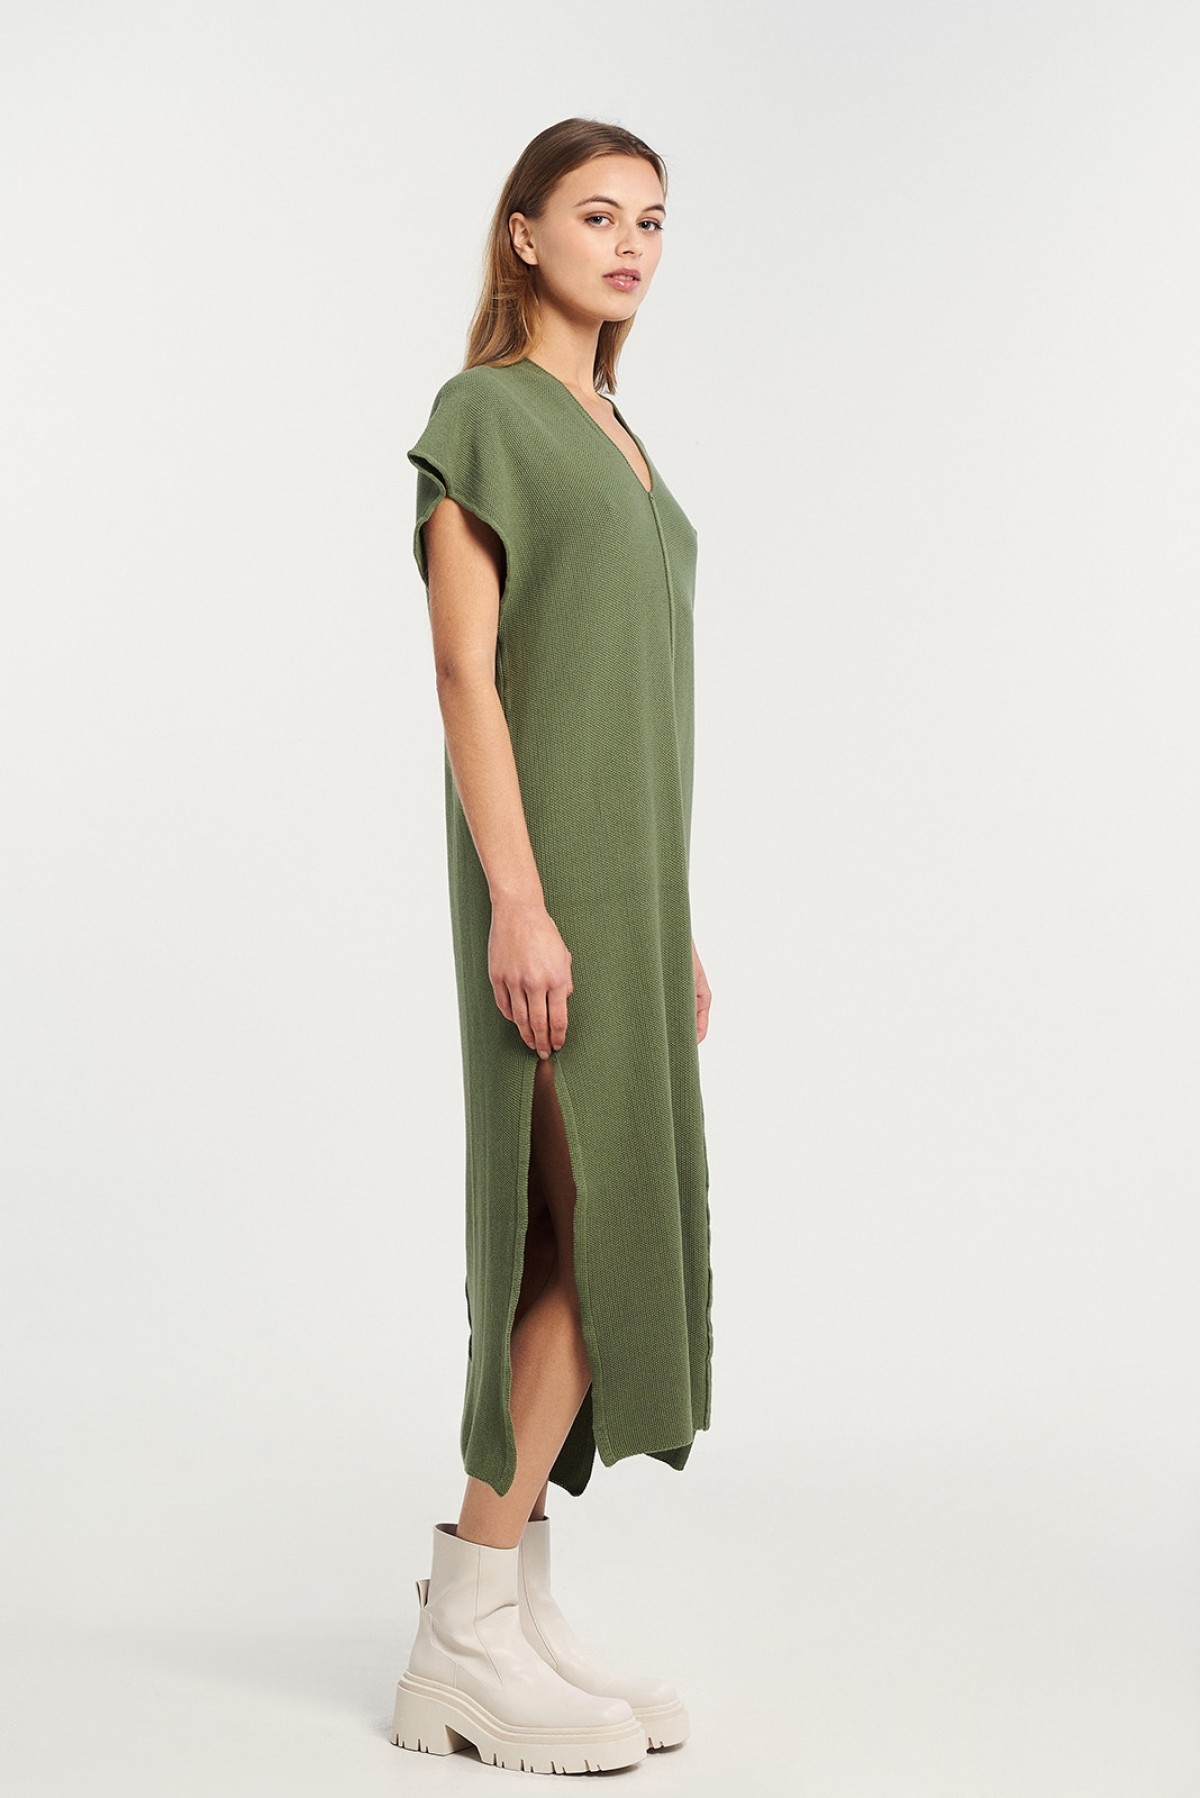 LONG KNIT PIQUE DRESS IN OLIVE GREEN